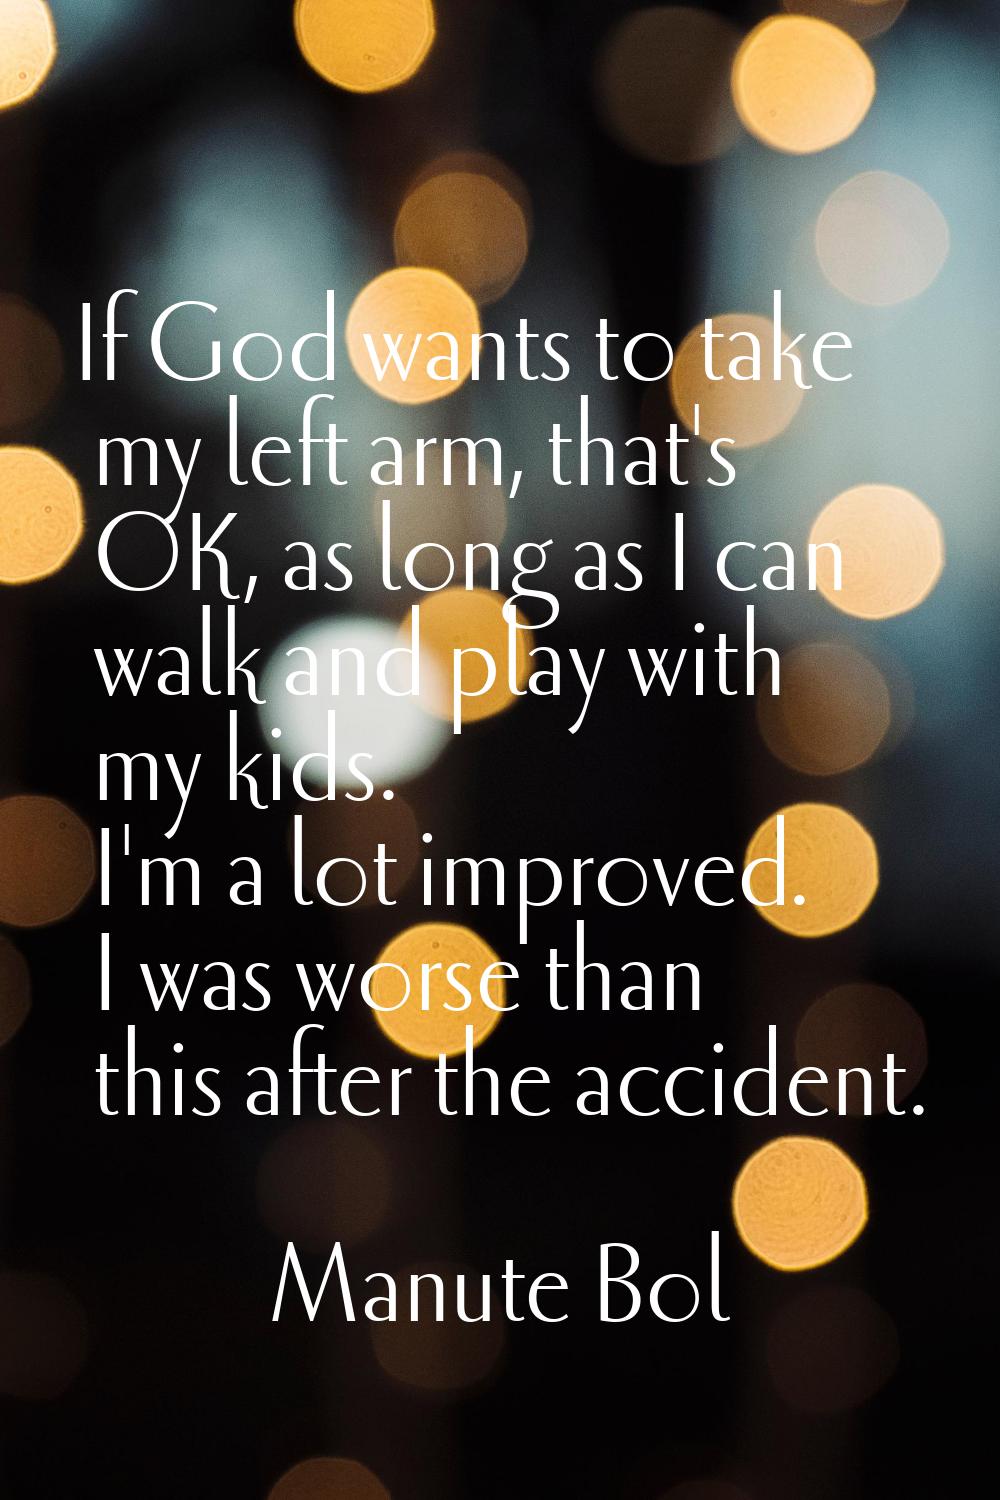 If God wants to take my left arm, that's OK, as long as I can walk and play with my kids. I'm a lot